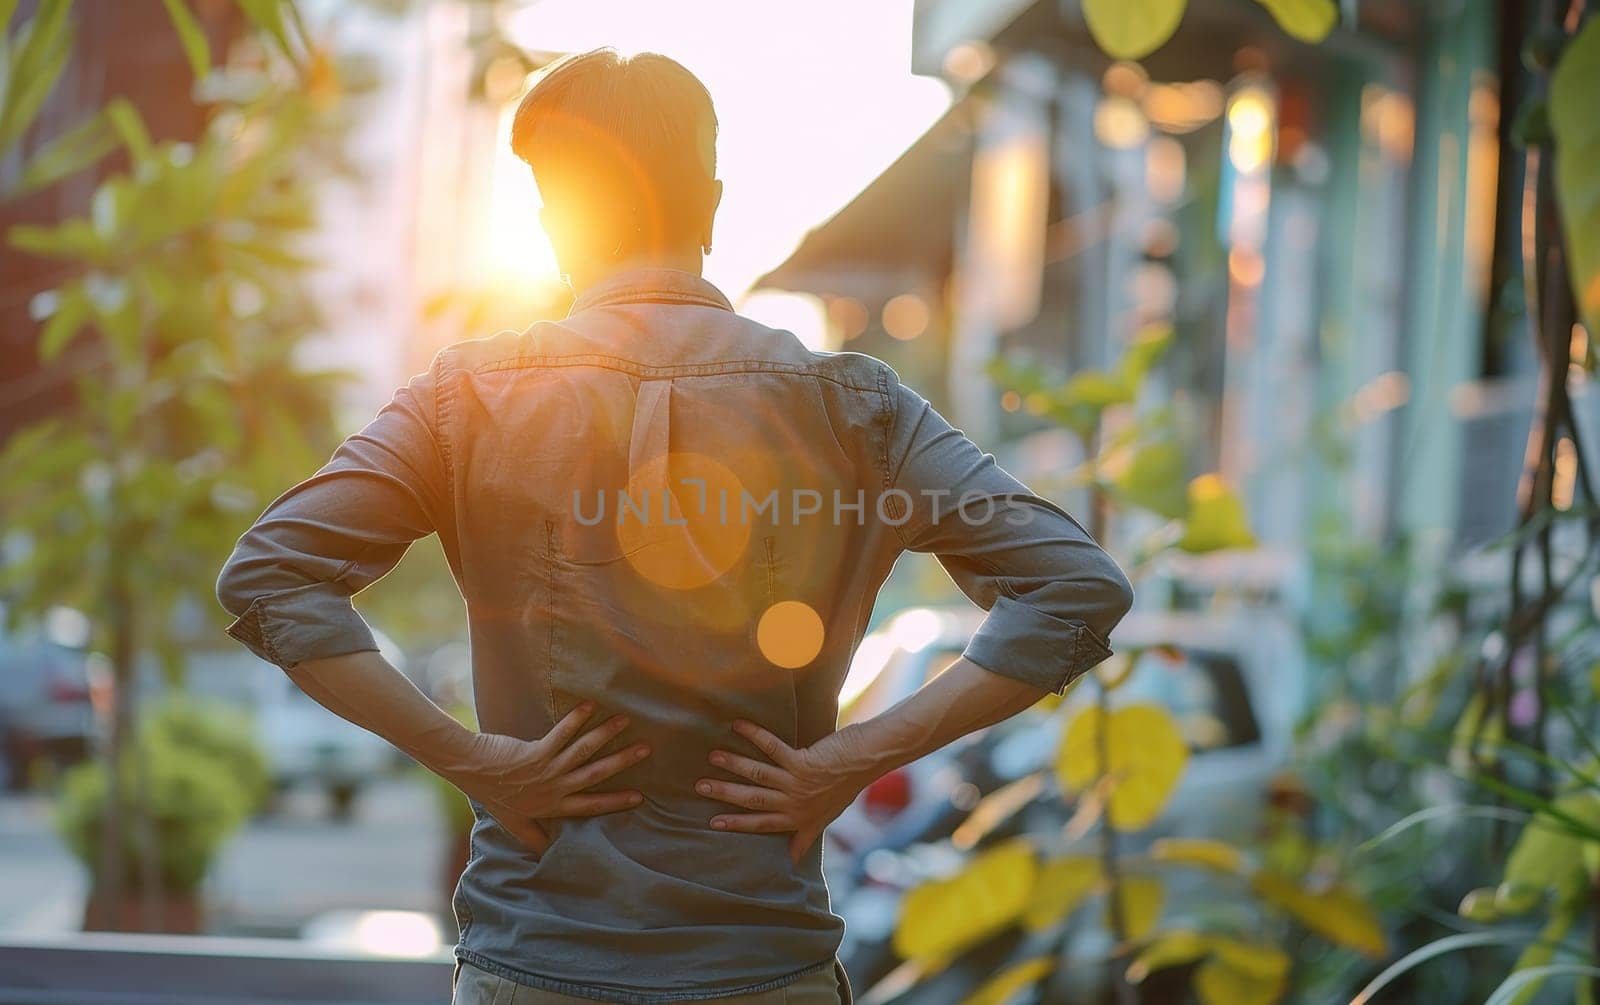 A person stands with hands on hips, facing the sunset. The golden hour light wraps around the silhouette, evoking a sense of contemplation and serenity